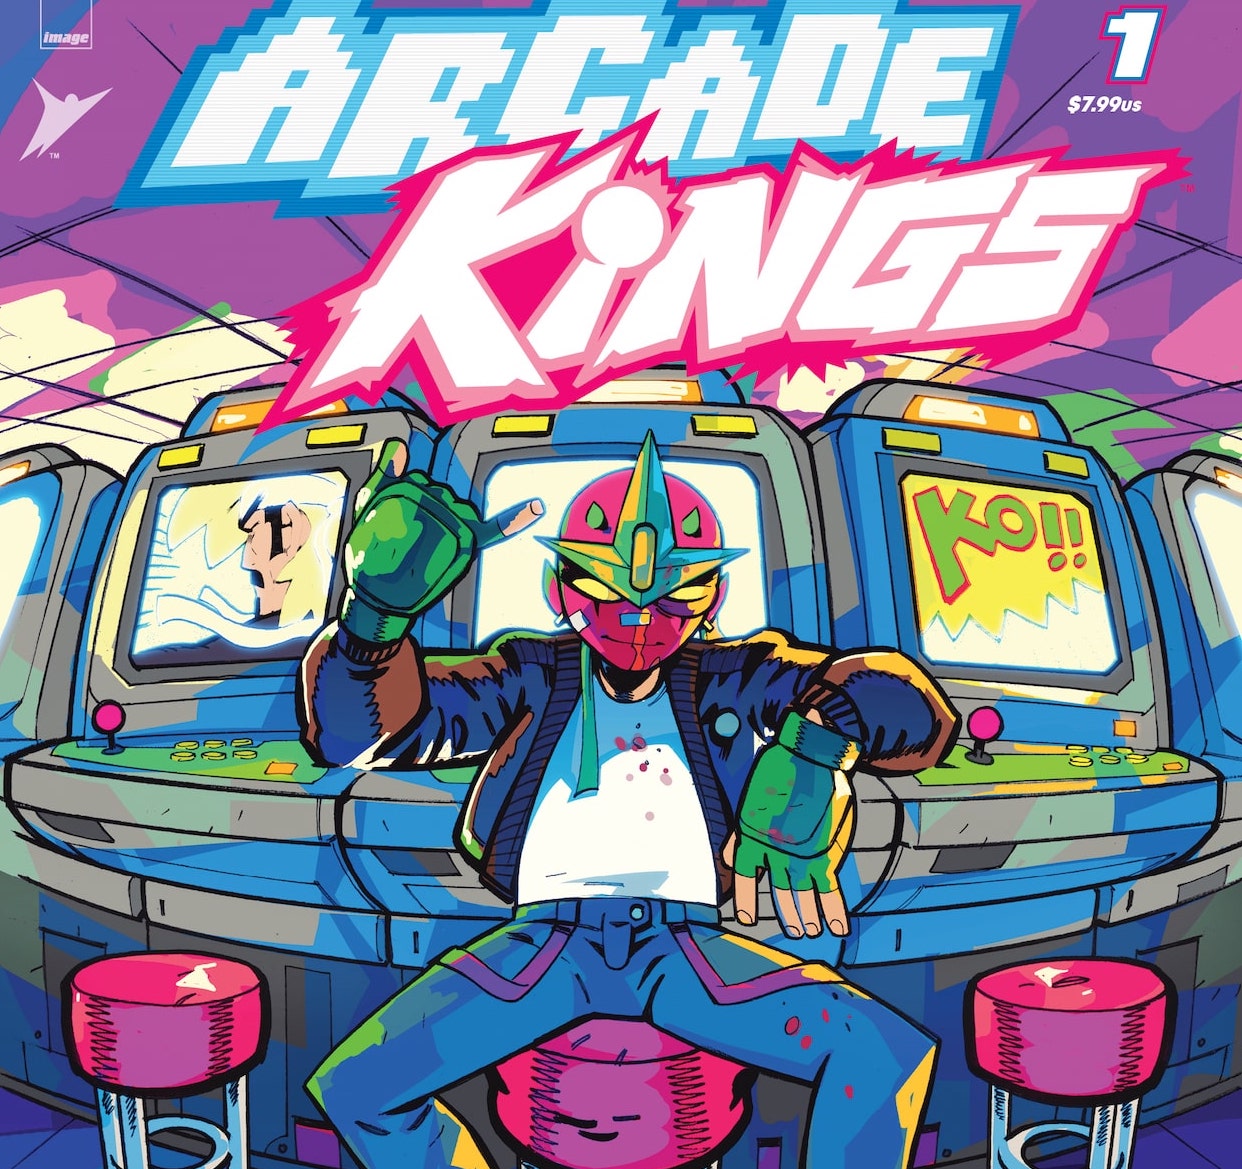 EXCLUSIVE: Prestige series 'Arcade Kings' coming from Skybound May 2023